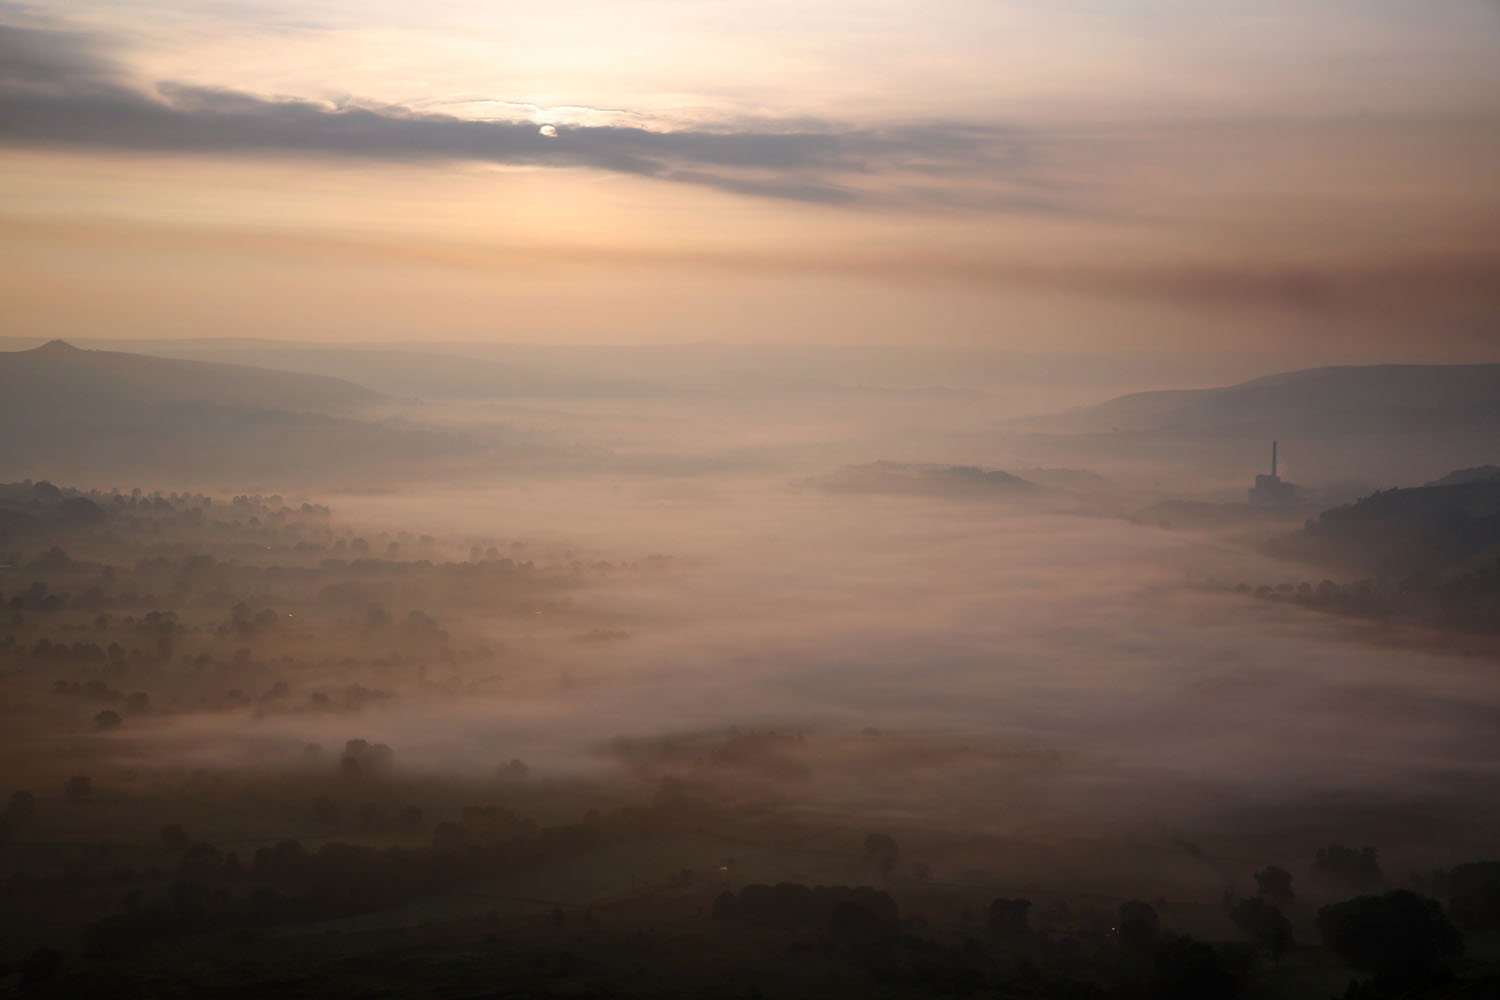 Sept. 10, 2014.  Mist lingers in Hope Valley at sunrise viewed from the top of Mam Tor in the Peak District in Castleton, United Kingdom. Much of the UK continues to enjoy mild Autumn weather with sunshine set to last for the next few days.